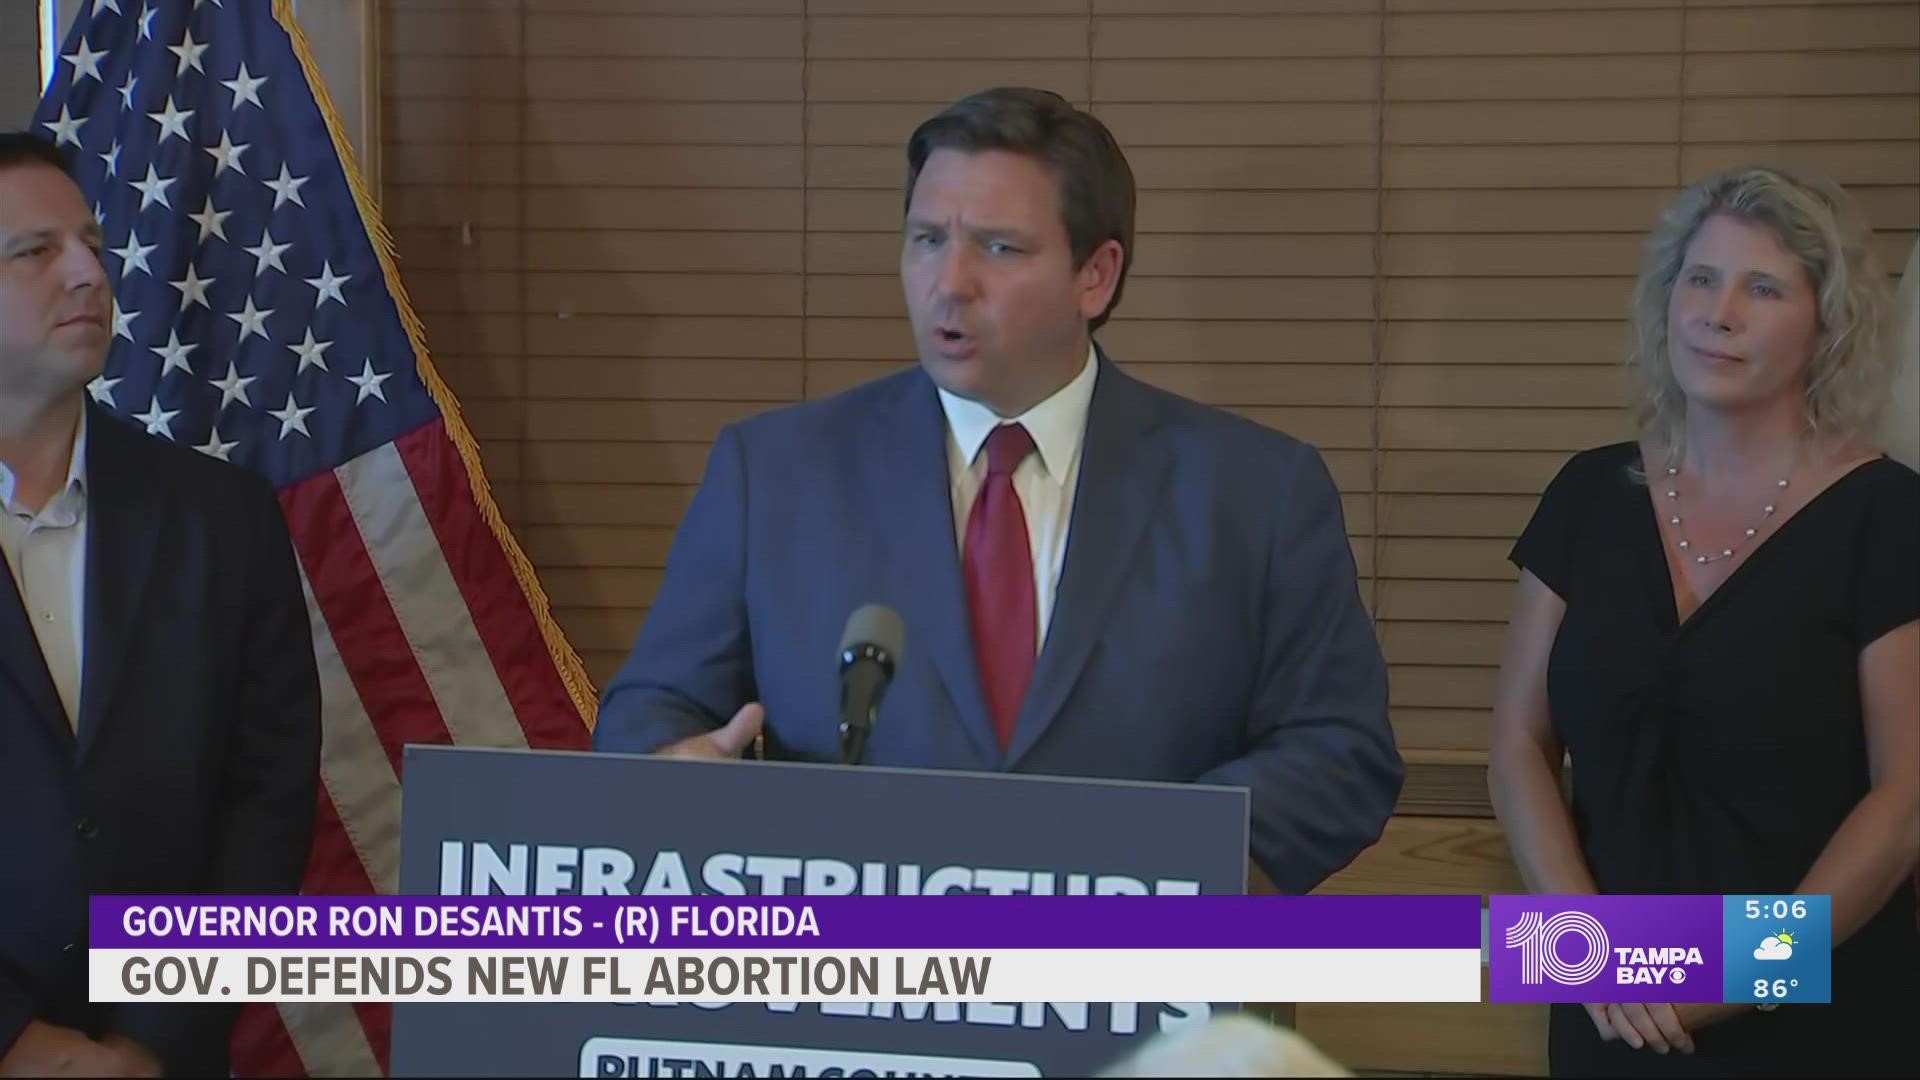 Not long after the vice president's comments on Florida's new abortion law, Gov. Ron DeSantis defended it.